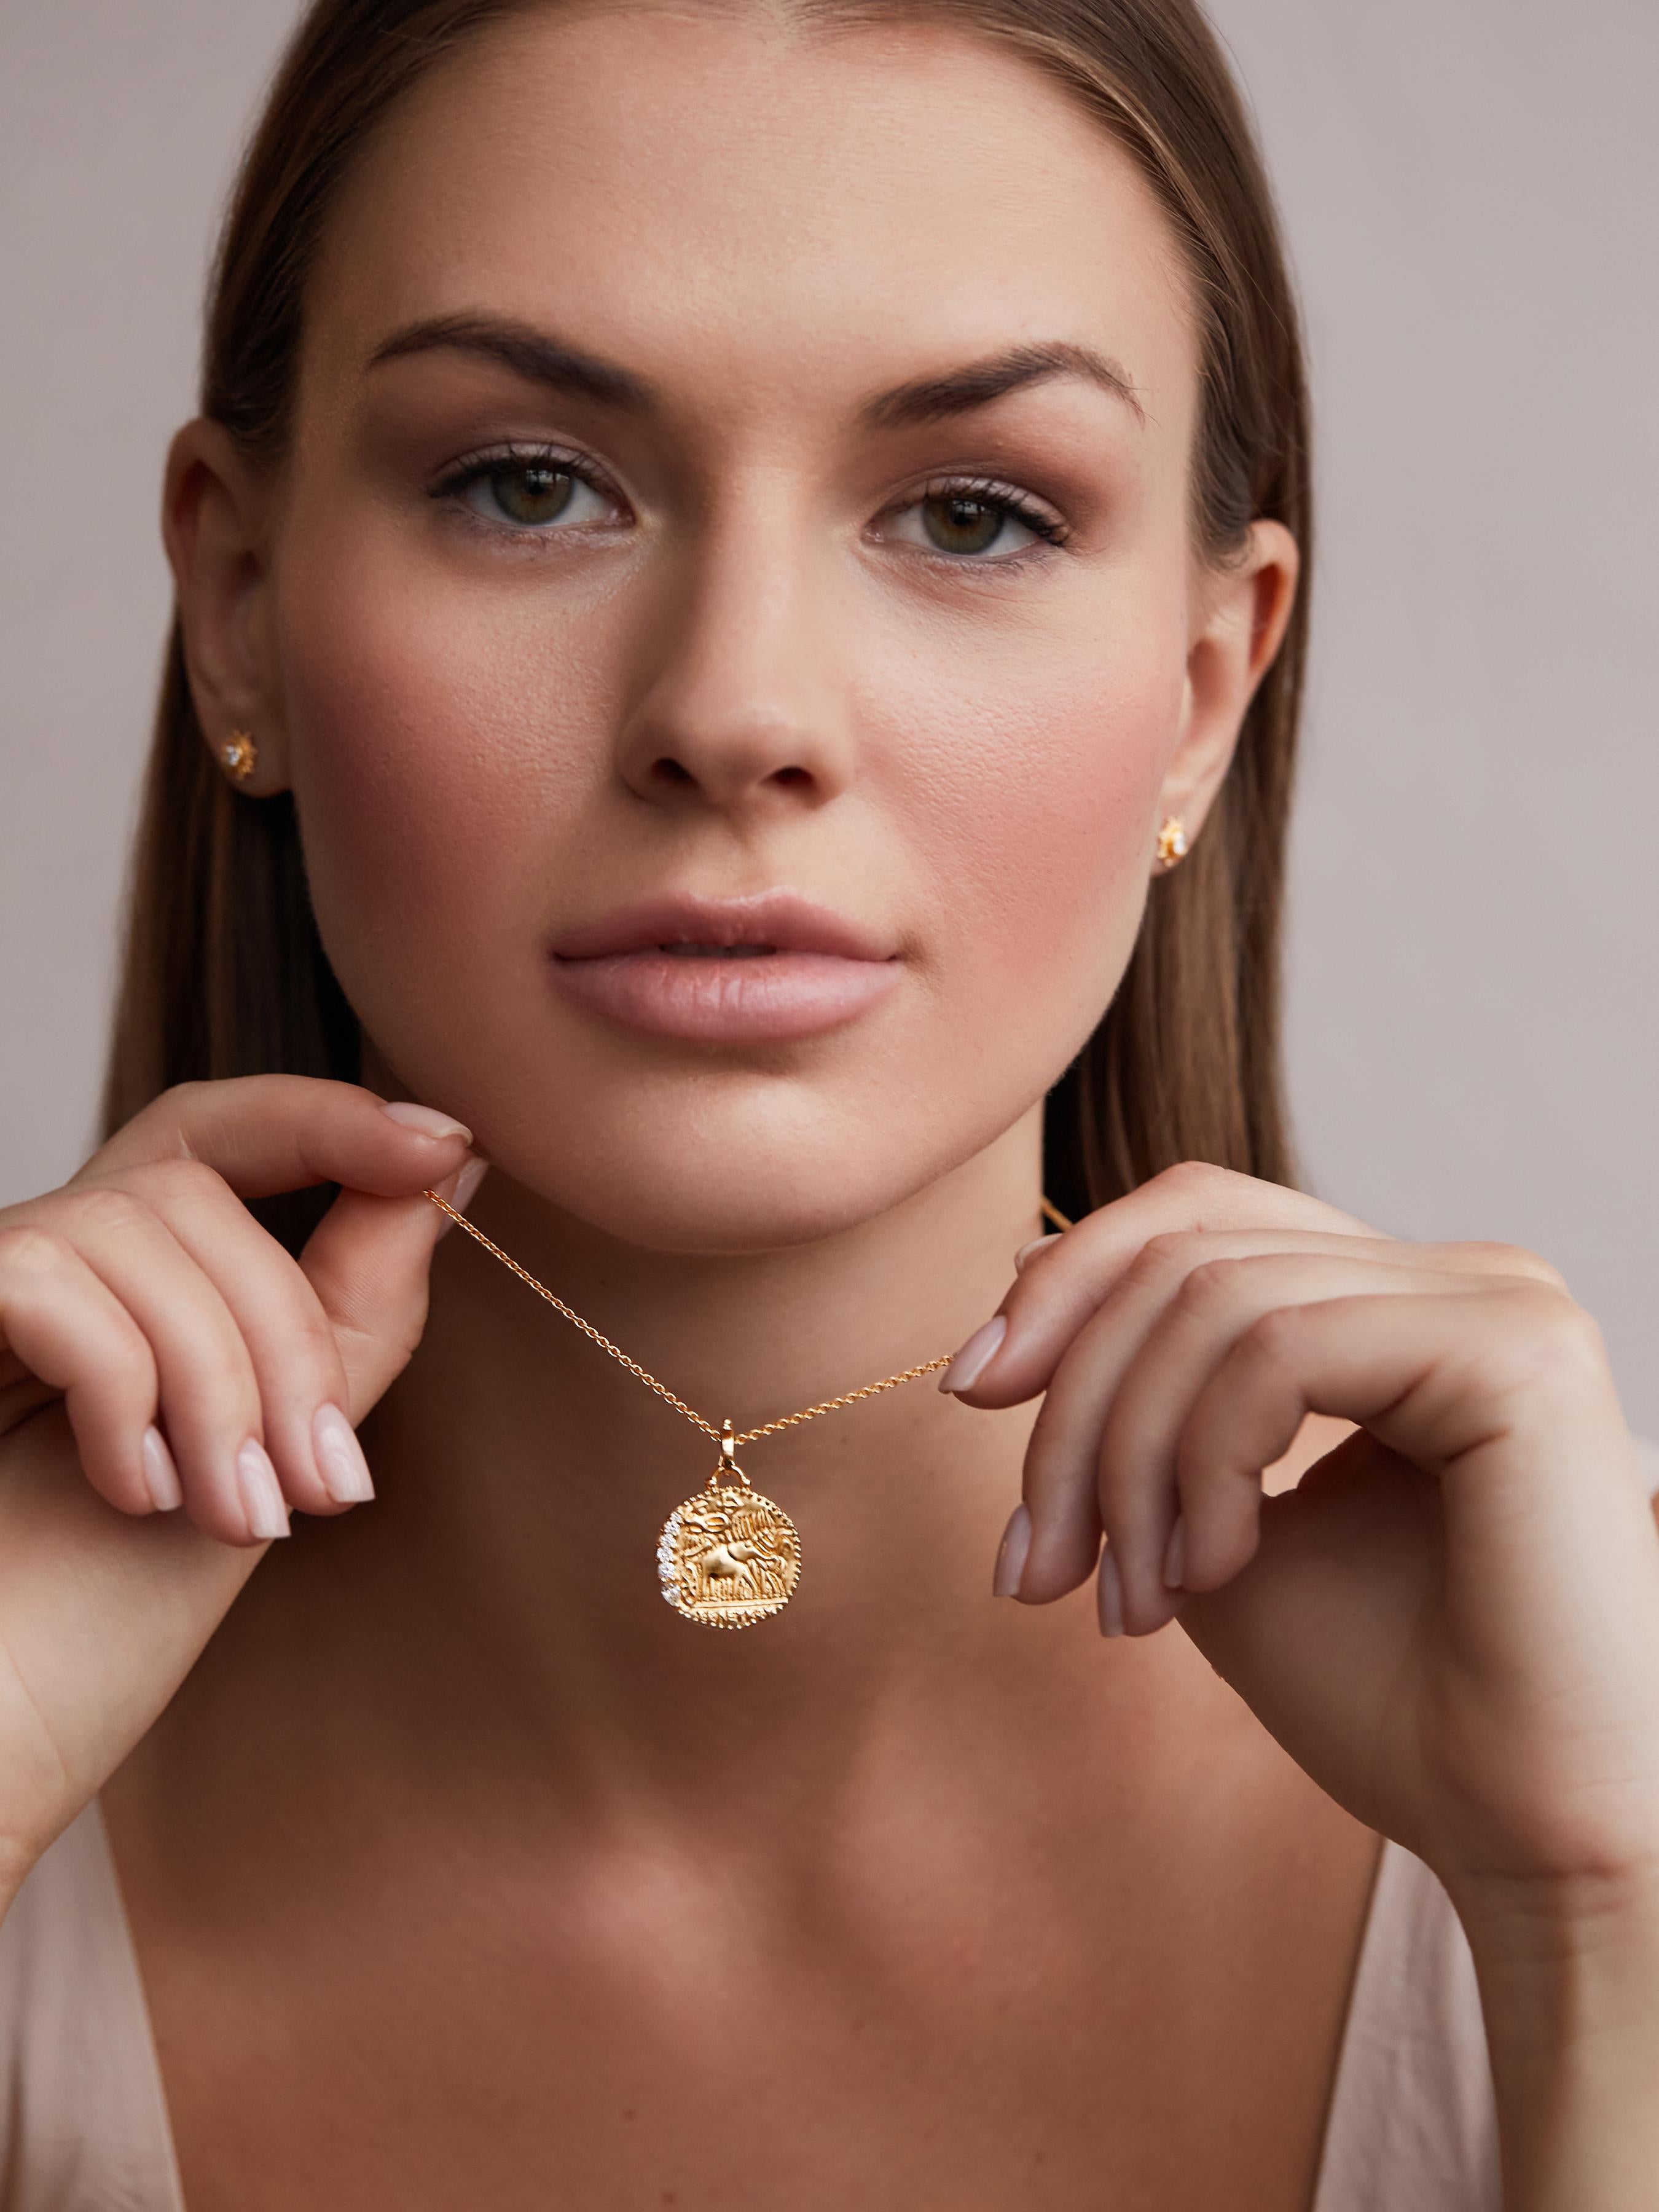 kaitlan collins gold medallion necklace meaning